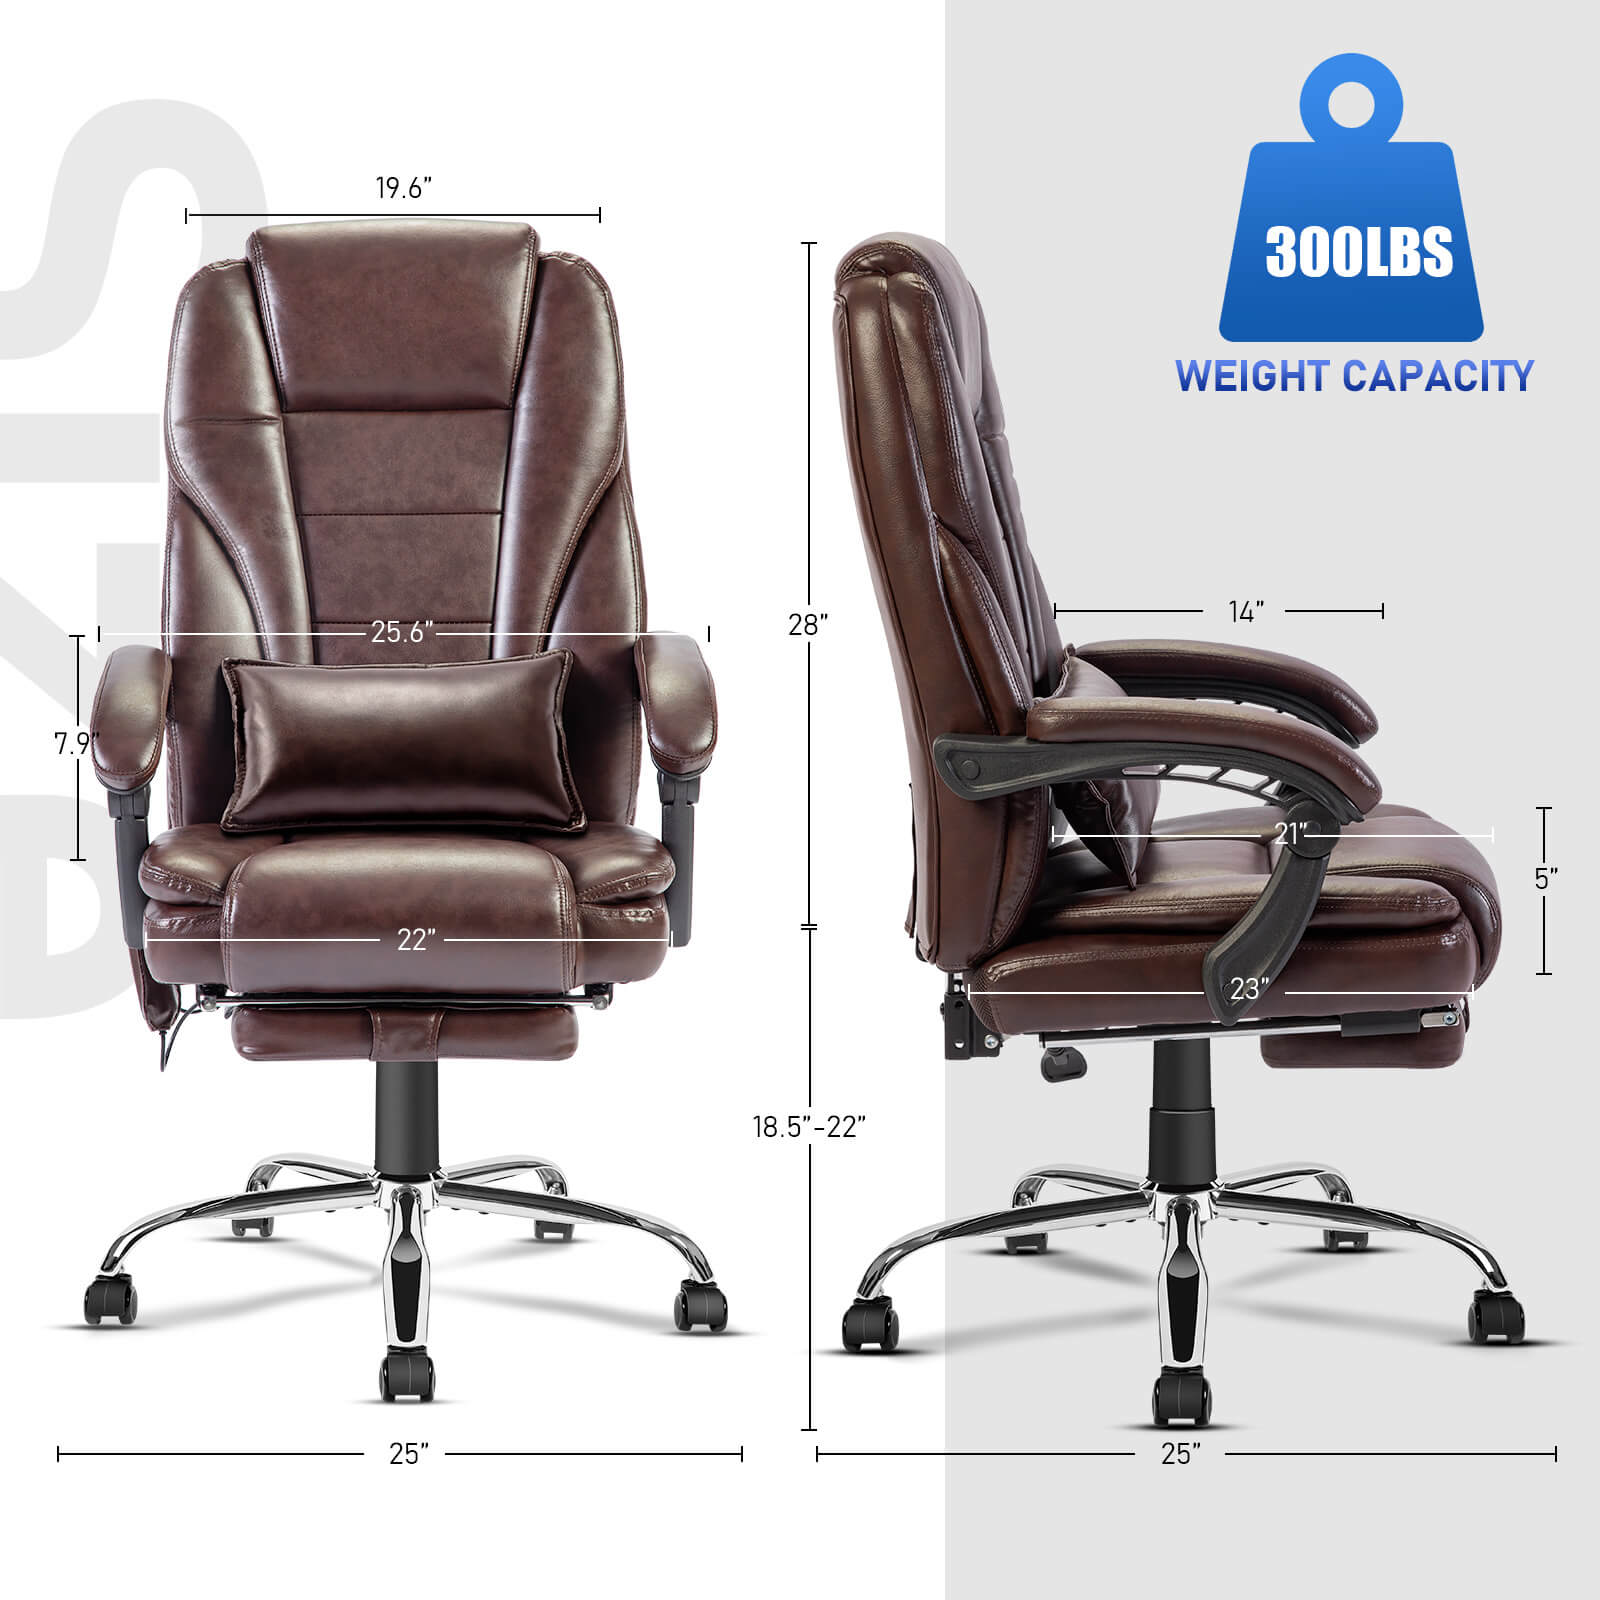 Big and Tall Ergonomic Executive Office Chair w/ 4-Point Massage & Heating, Reclining Backrest, Footrest & Pillow, Brown